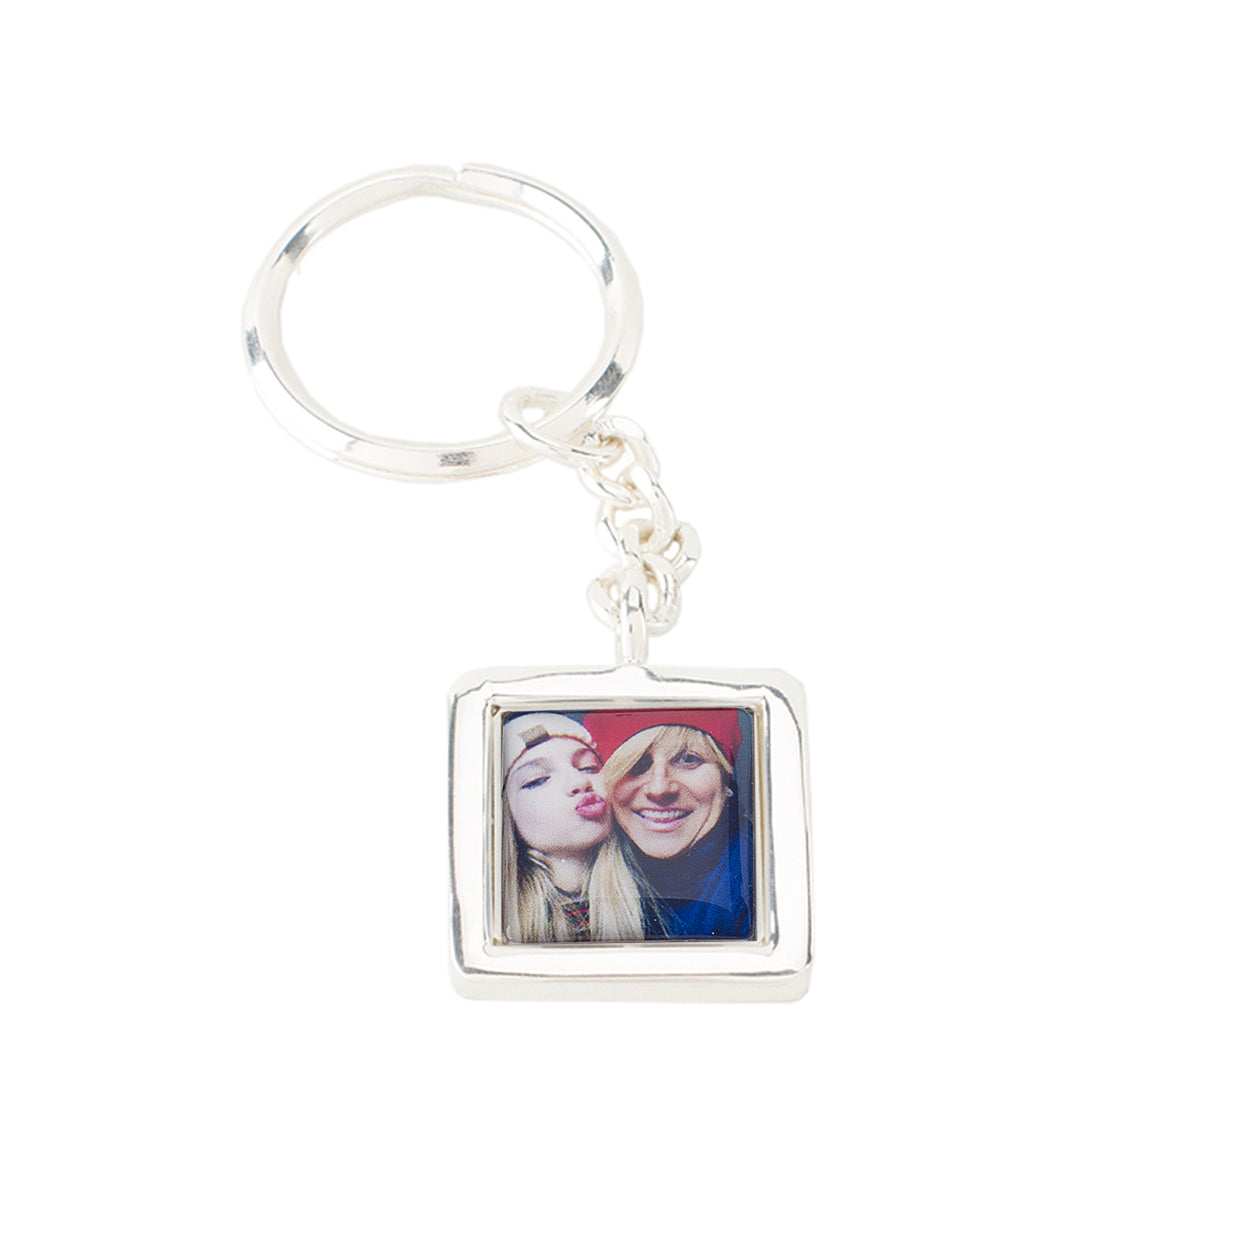 Best Day Ever Key Ring Medium Square - Silver